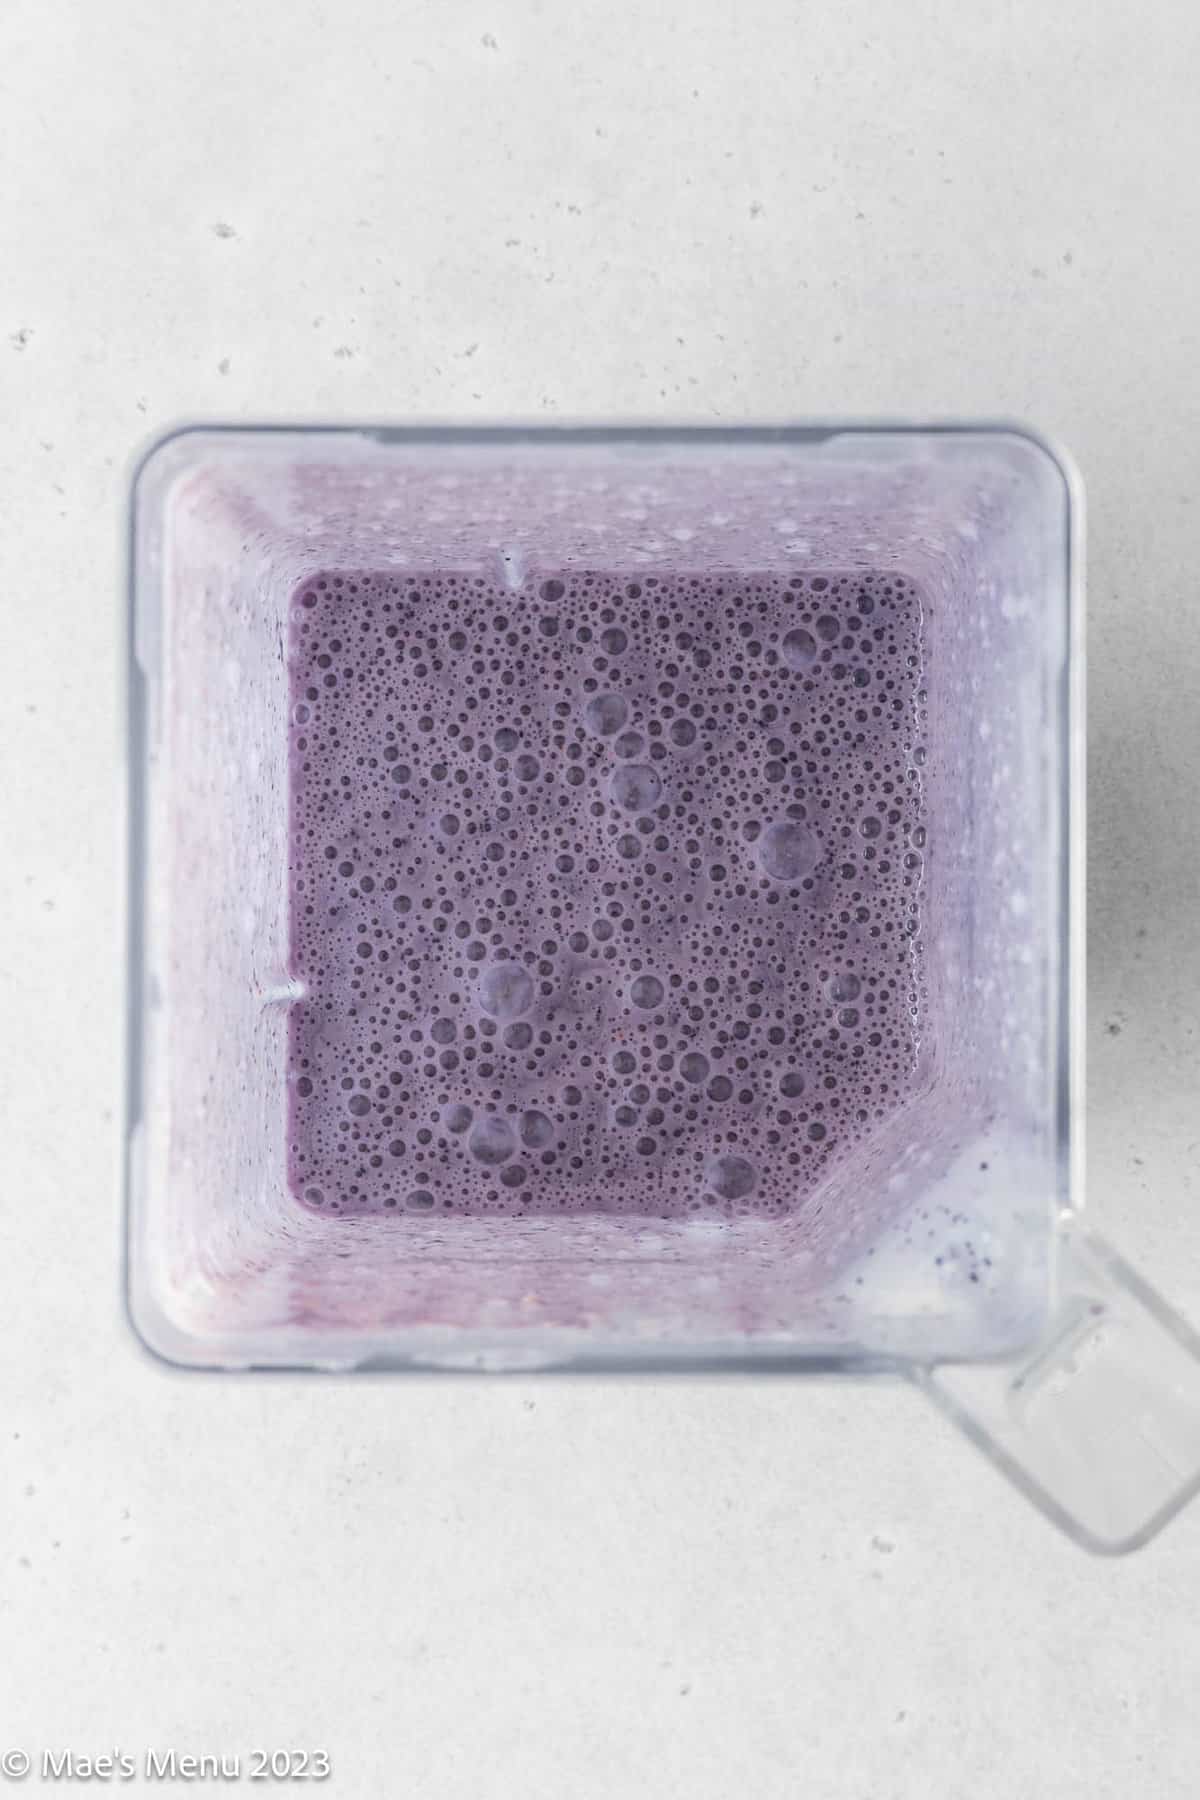 The protein popsicle mixture in the blender.